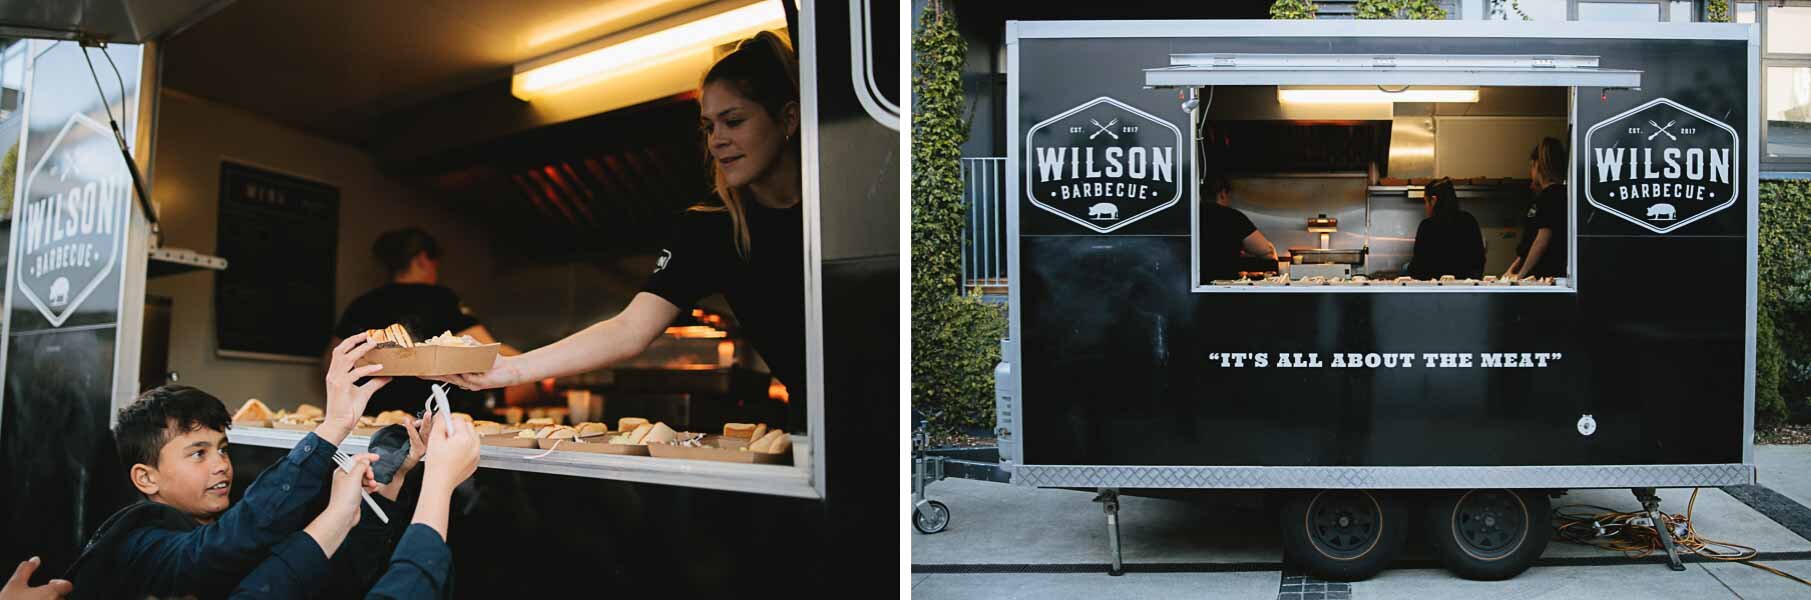 Wilson barbecue food truck